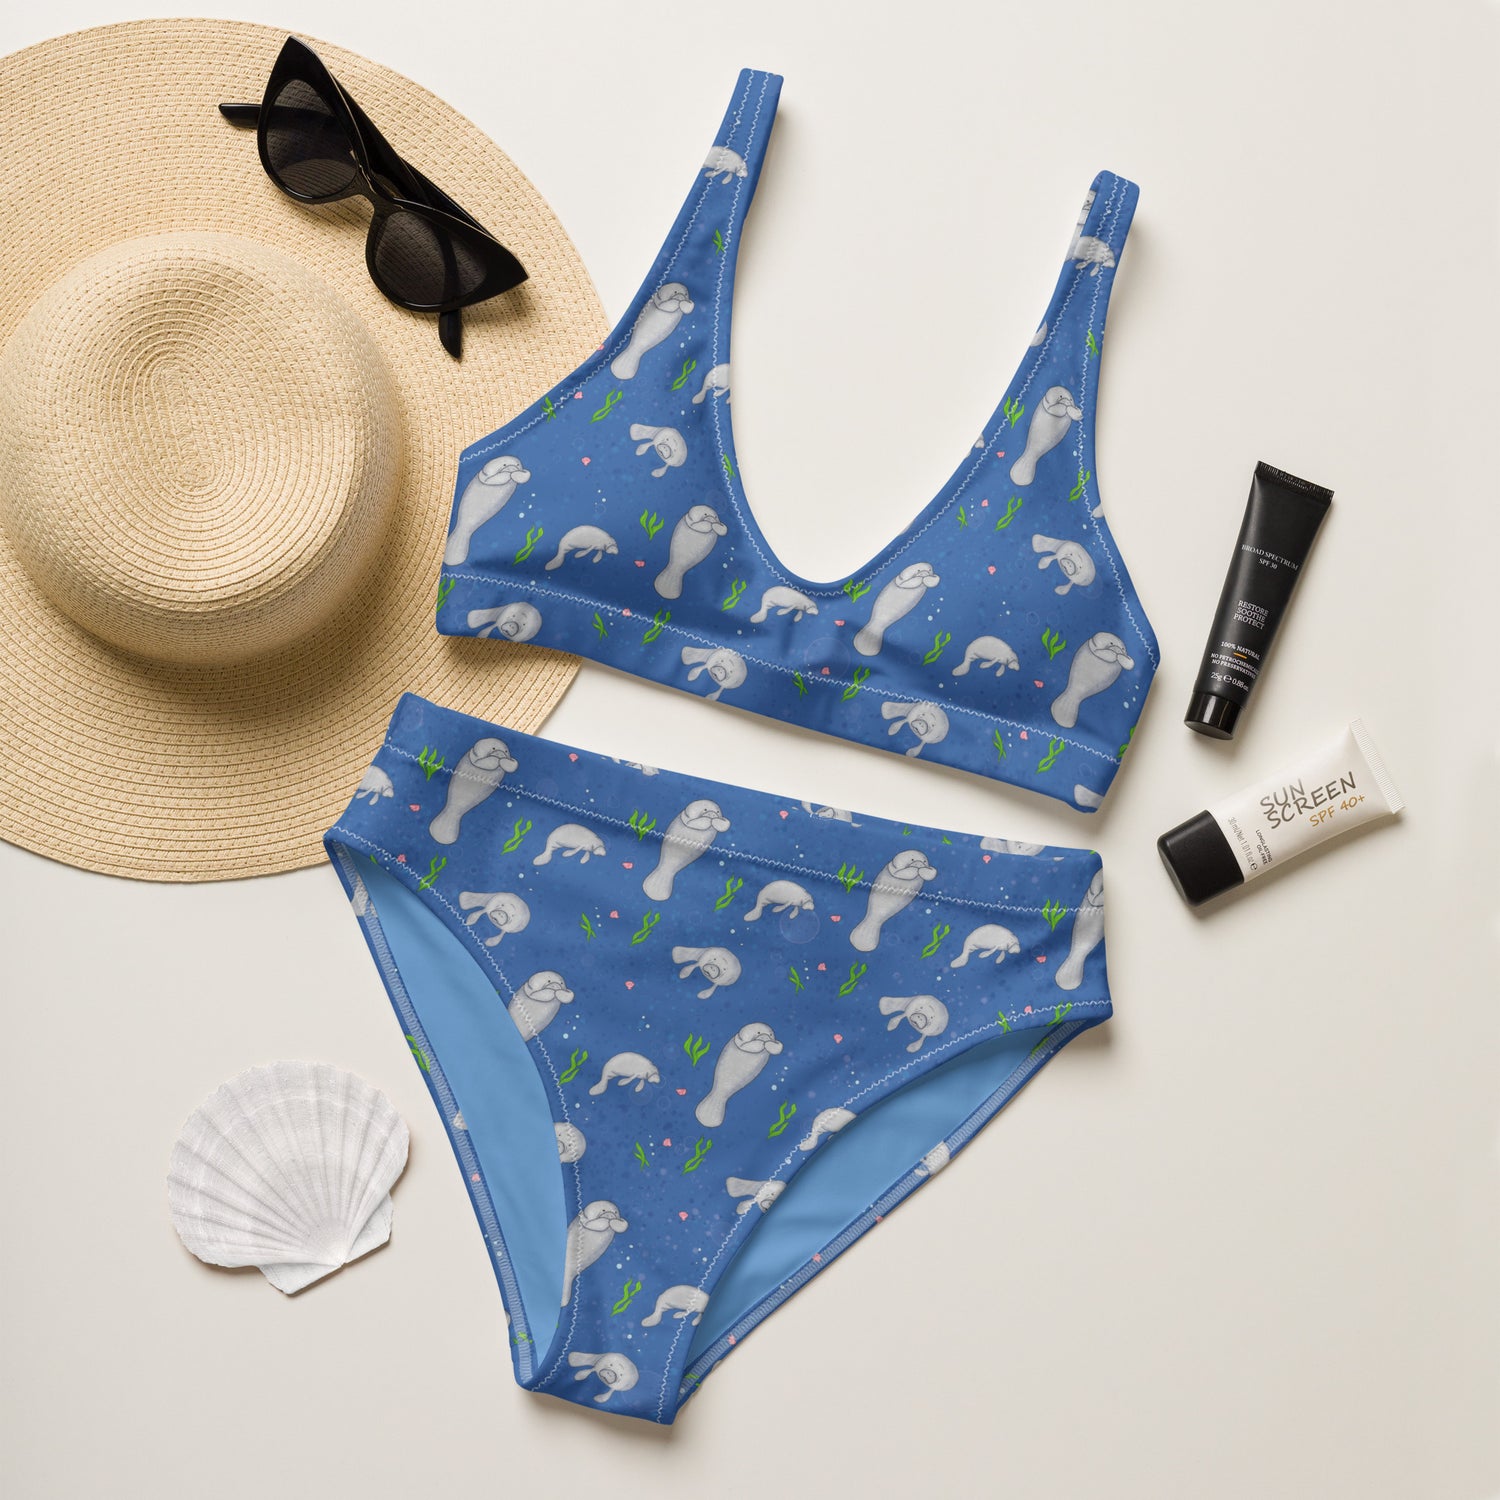 High-waisted bikini with hand-illustrated manatee pattern on a blue background. Made from recycled polyester combined with stretchable fabric. Has double layers and removable pads. Flat lay view shown with sun hat, sunglasses, sunscreen and seashell.